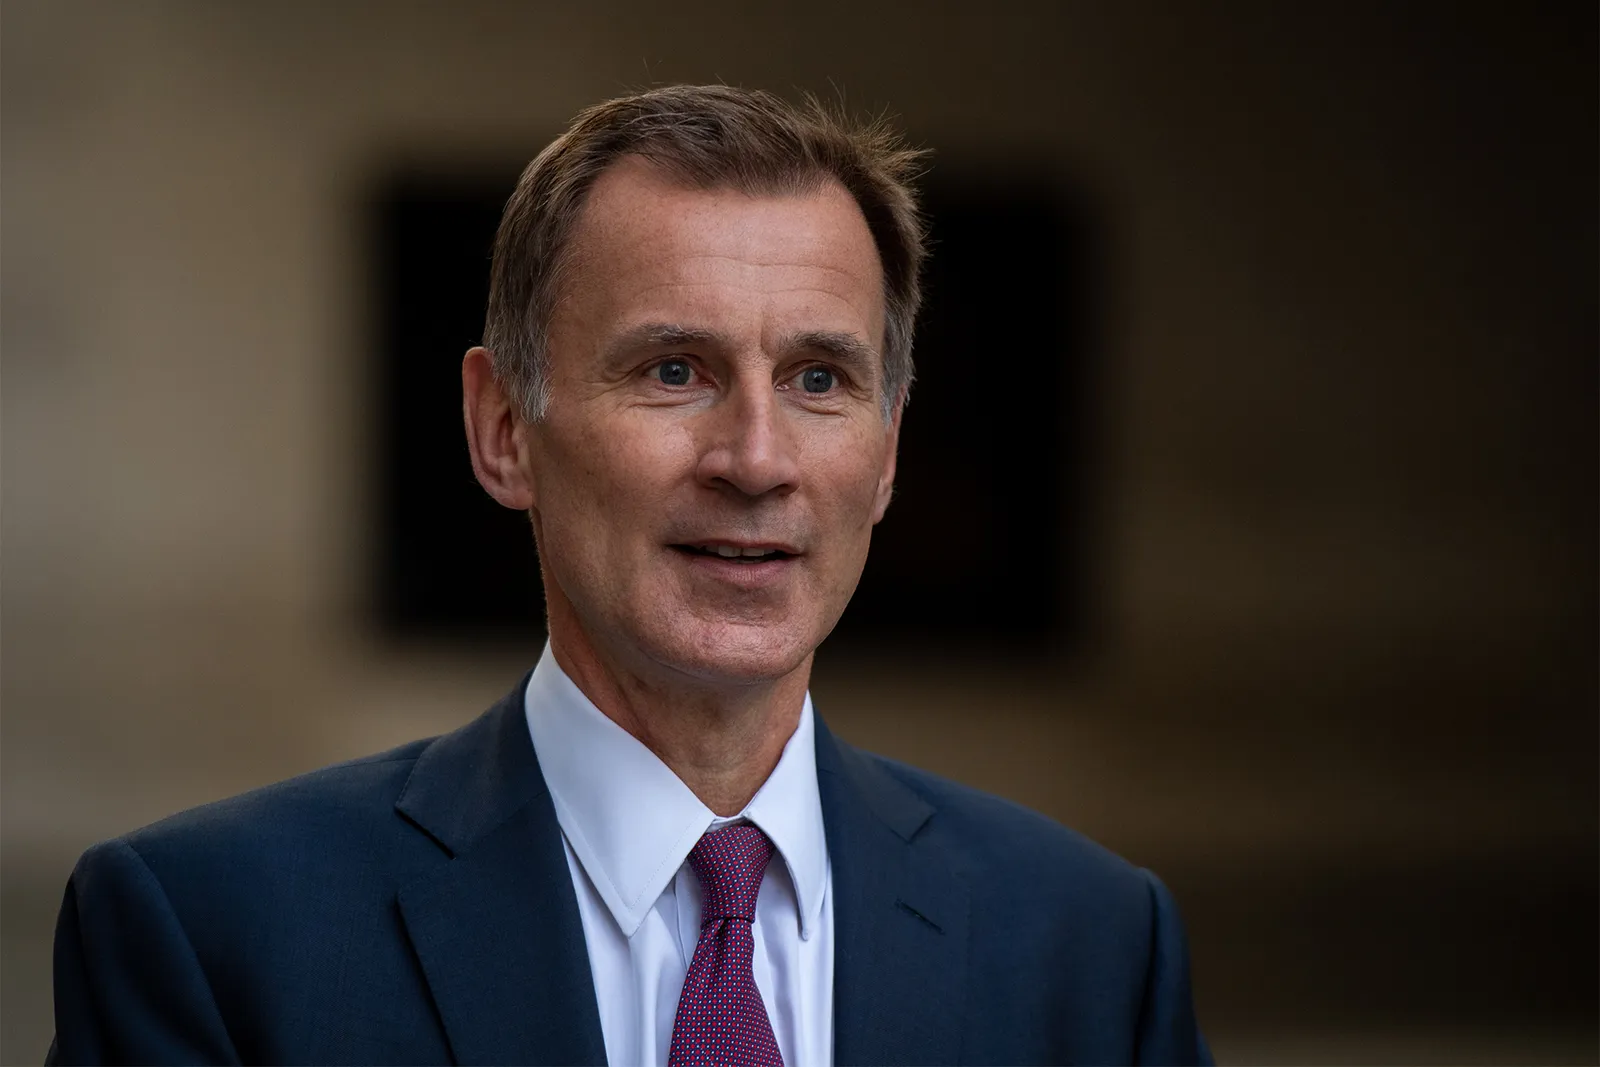 Jeremy Hunt, the UK Chancellor of the Exchequer